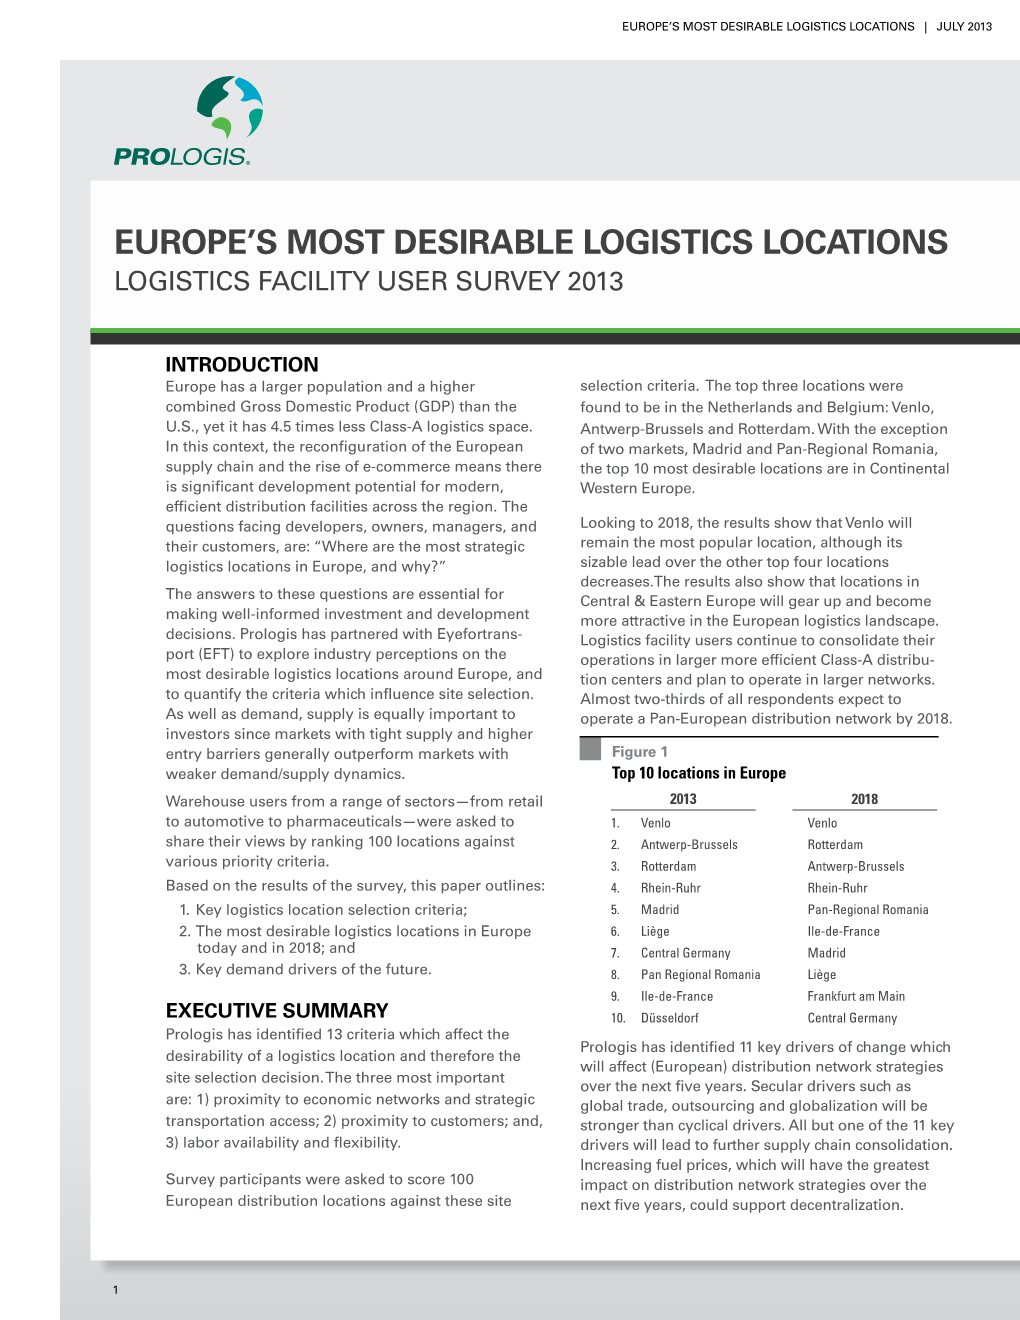 Europe's Most Desirable Logistics Locations